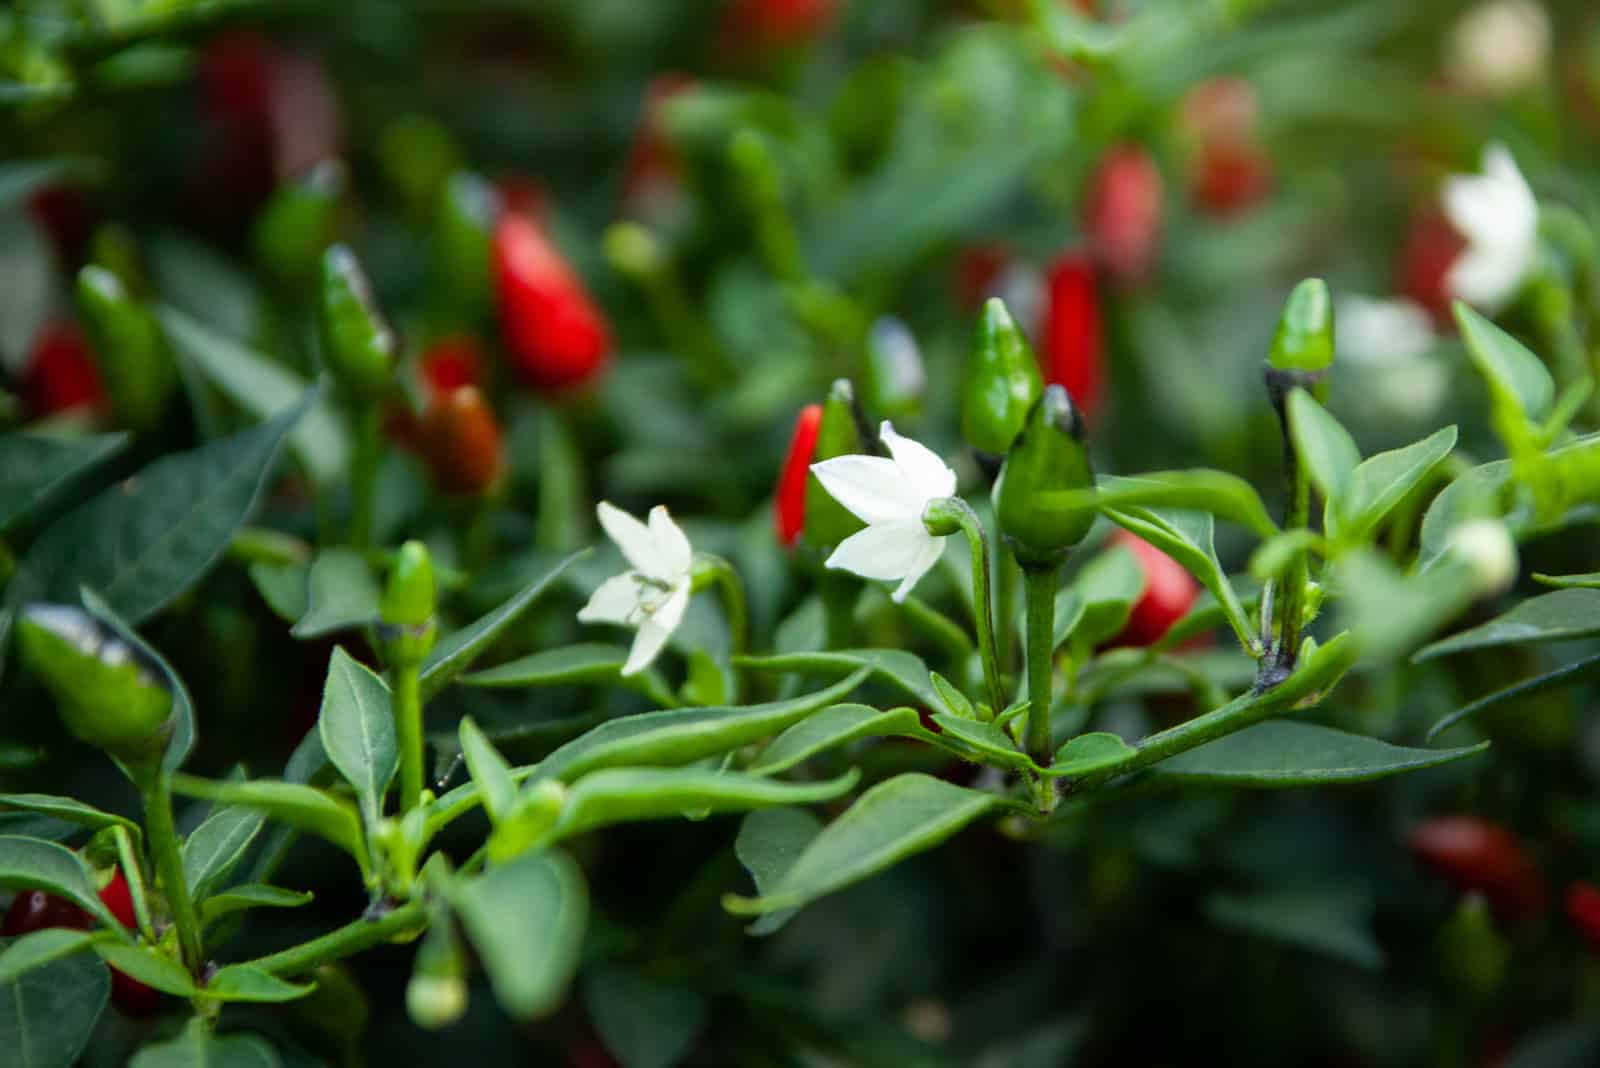 Blooming Chilli Plant in a Garden